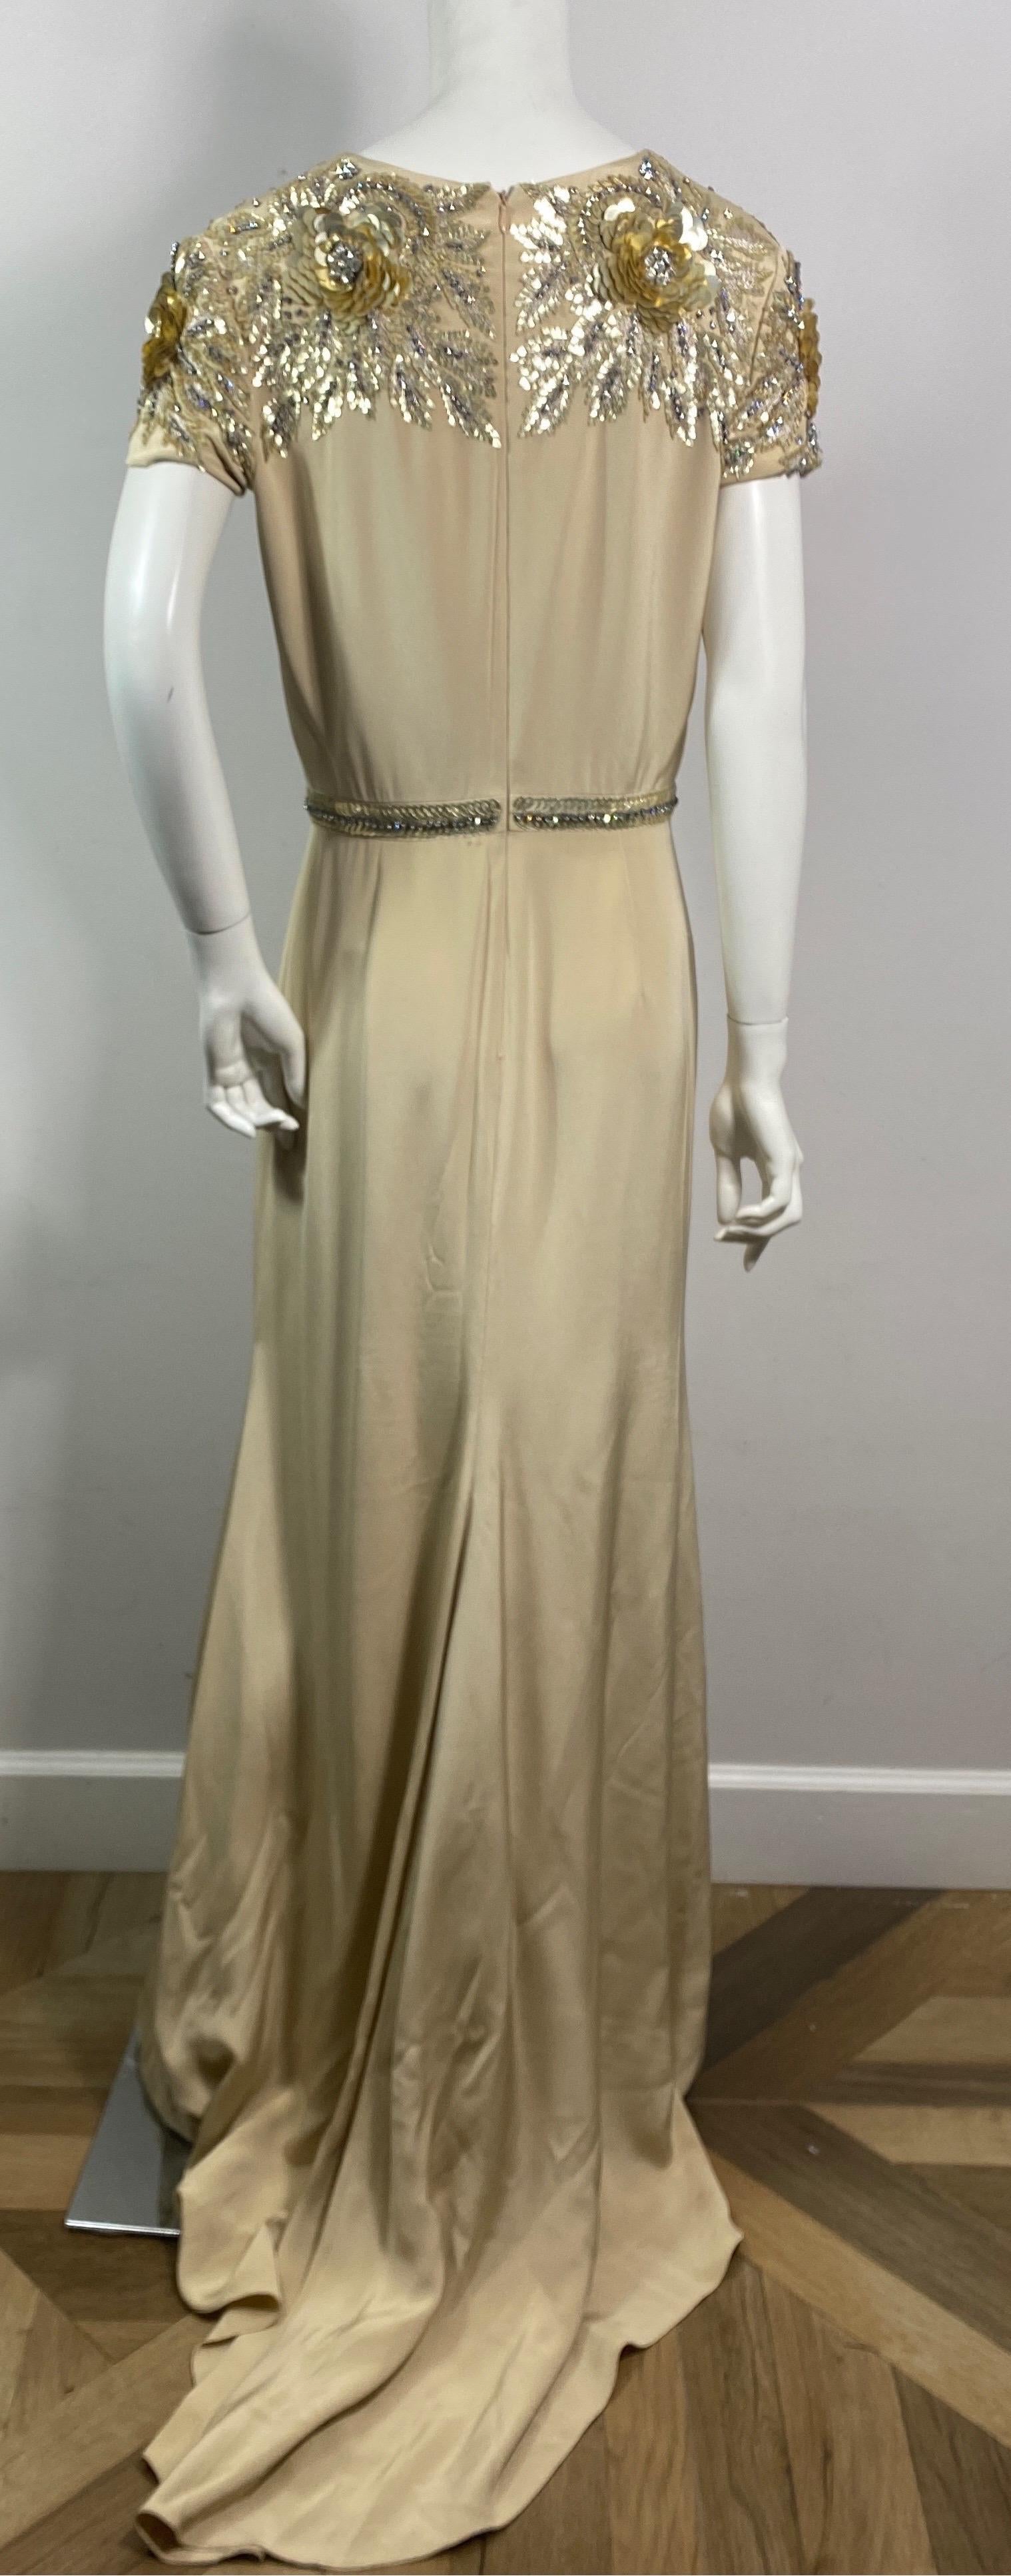 Naeem Kahn Heavily Embellished Champagne Silk Gown-Size 10 For Sale 8